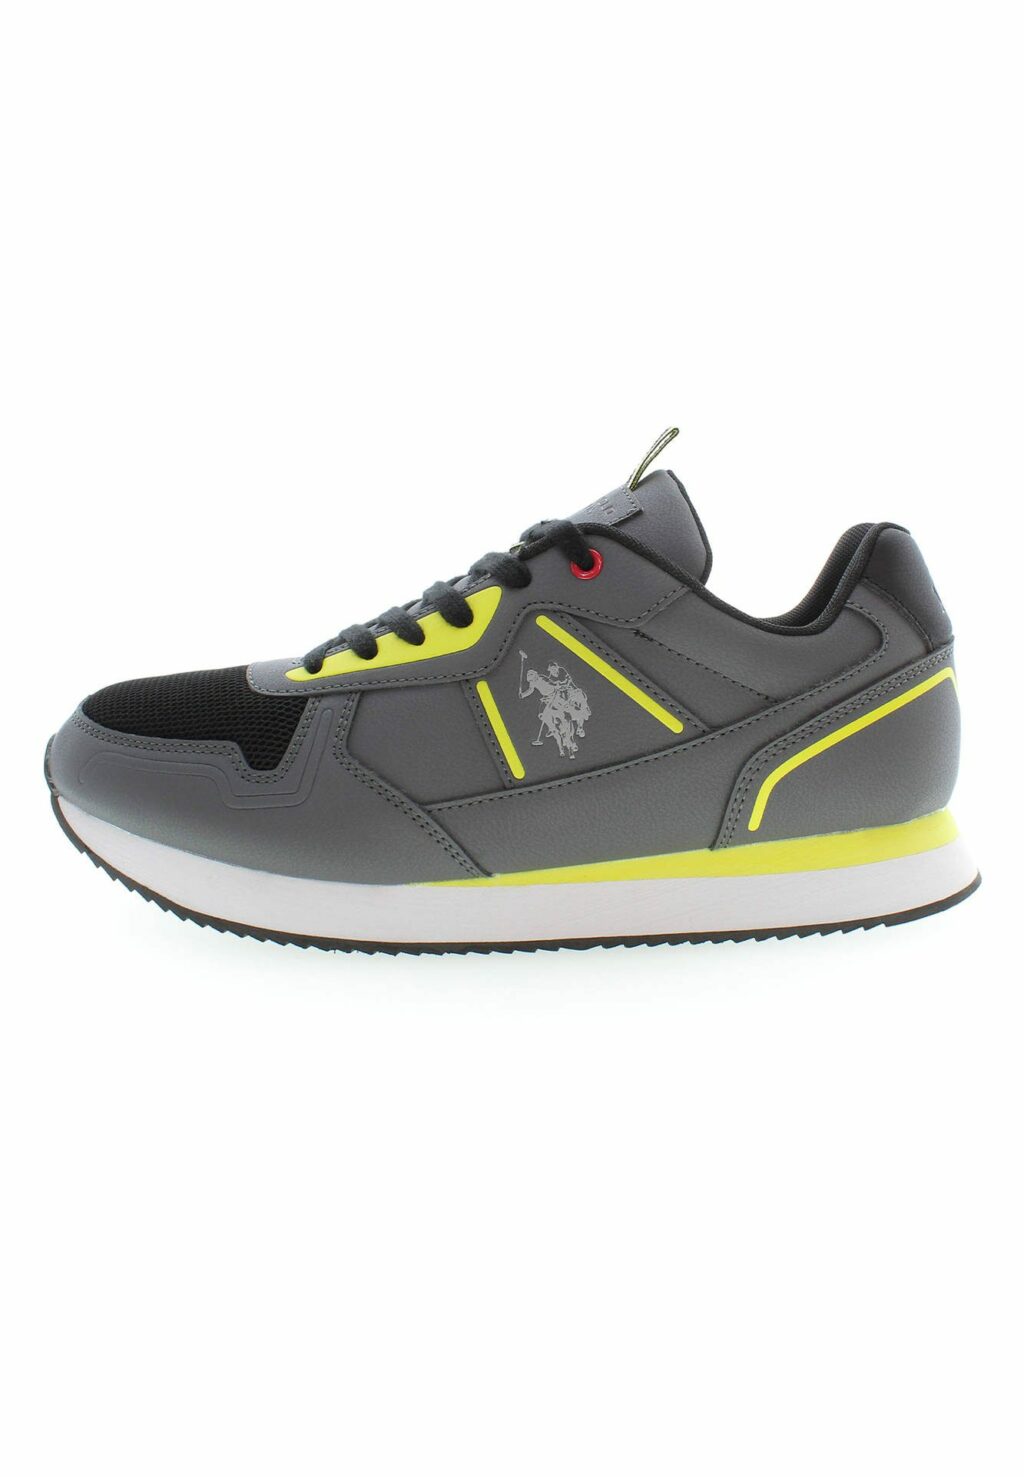 US POLO BEST PRICE MEN'S SPORTS SHOES GRAY NOBIL004MBYM1_GRIGIO_GRY001